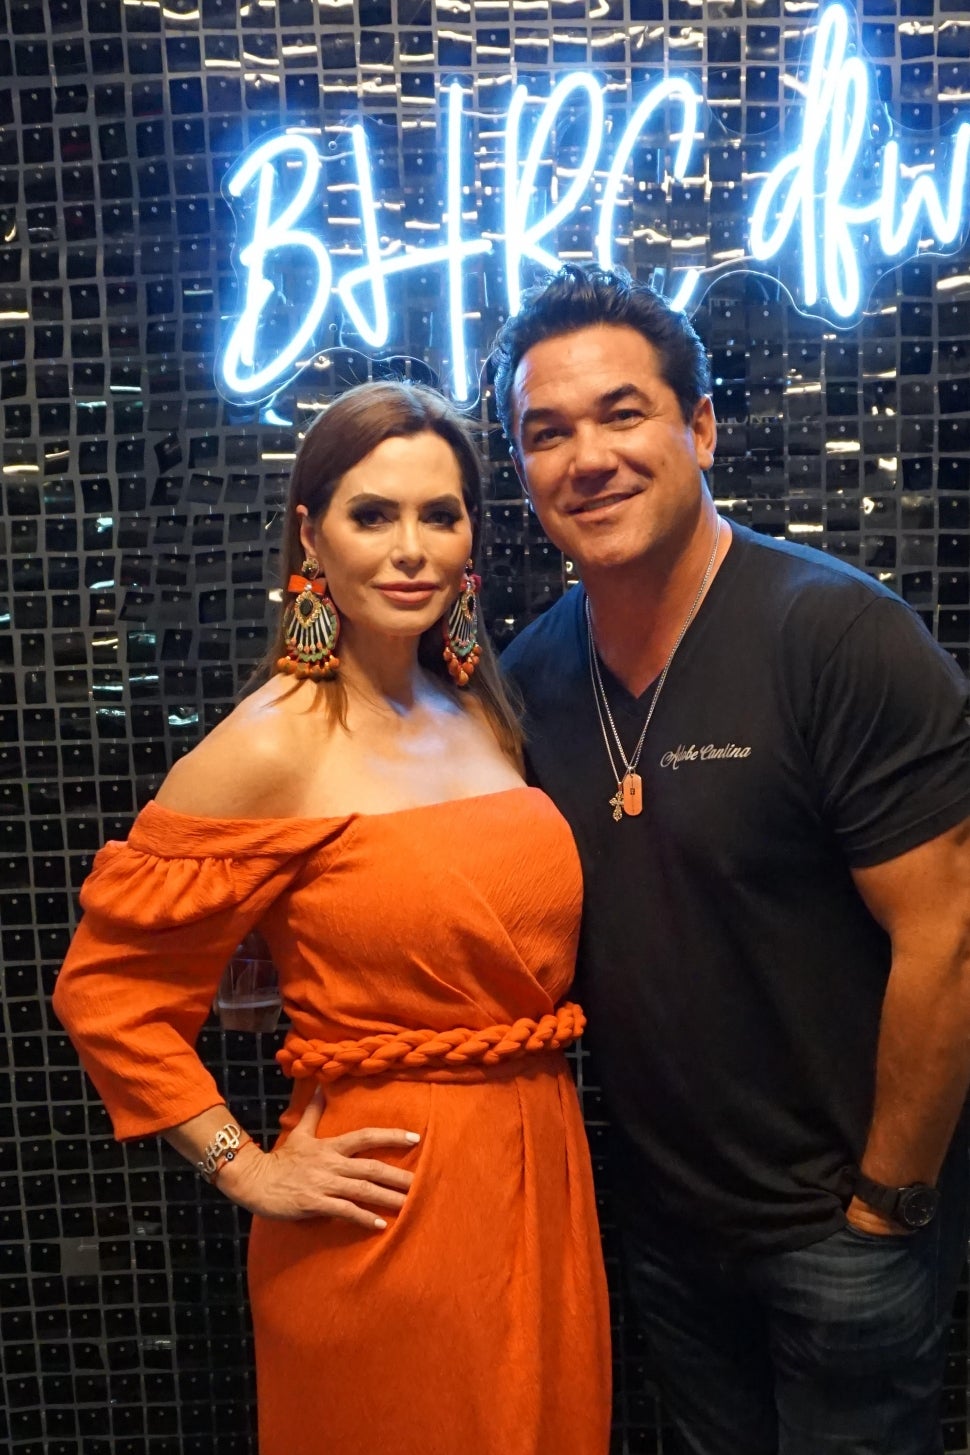 D'Andra Simmons and Dean Cain